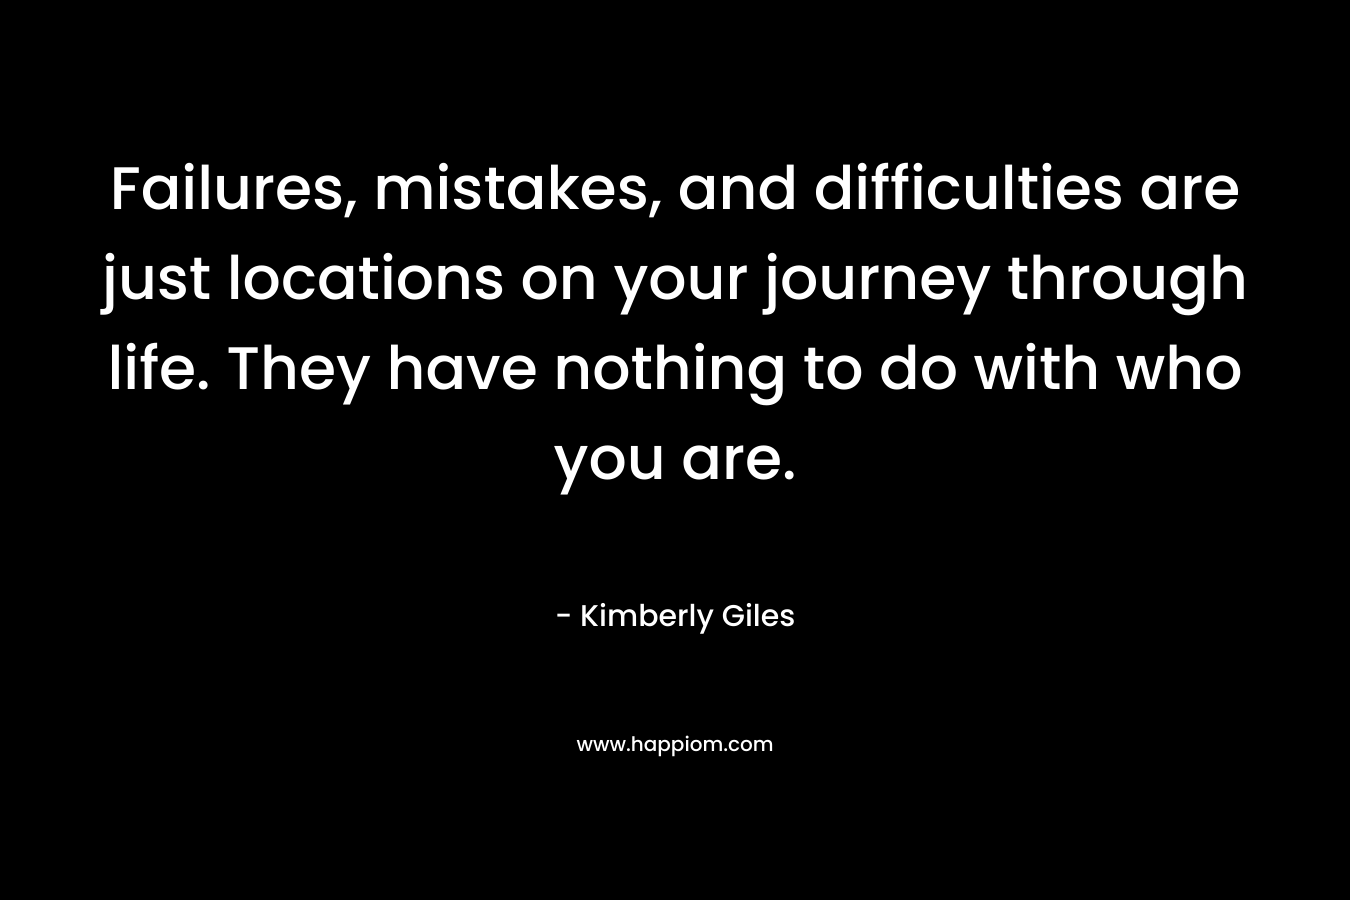 Failures, mistakes, and difficulties are just locations on your journey through life. They have nothing to do with who you are. – Kimberly Giles